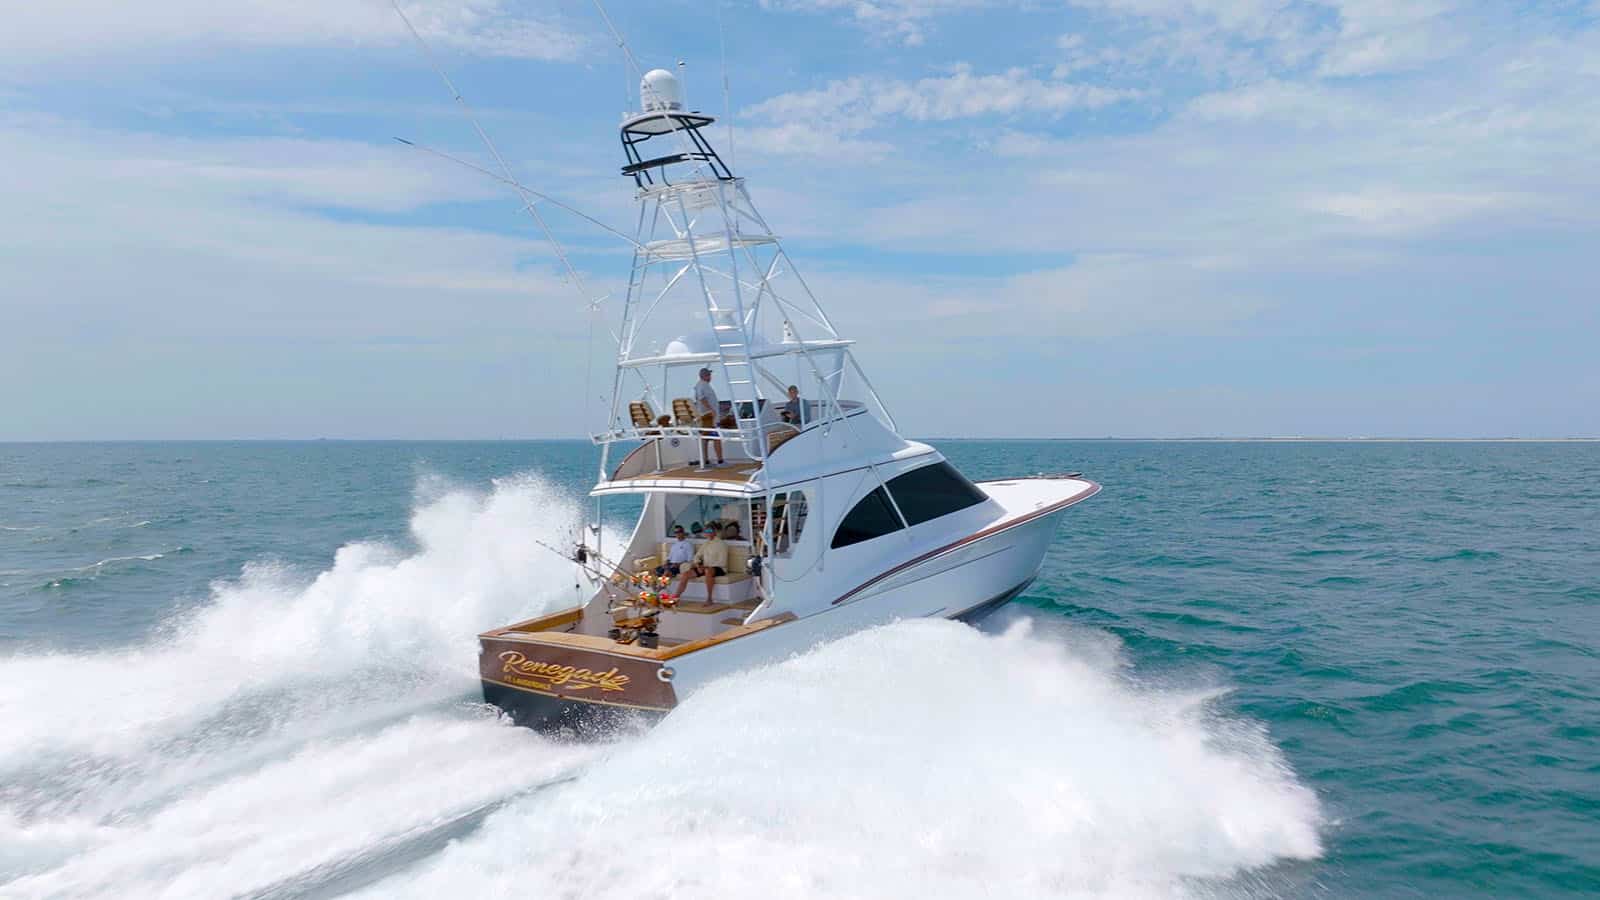 Another Truly Unique Sportfish Launched by Jarrett Bay Boatworks